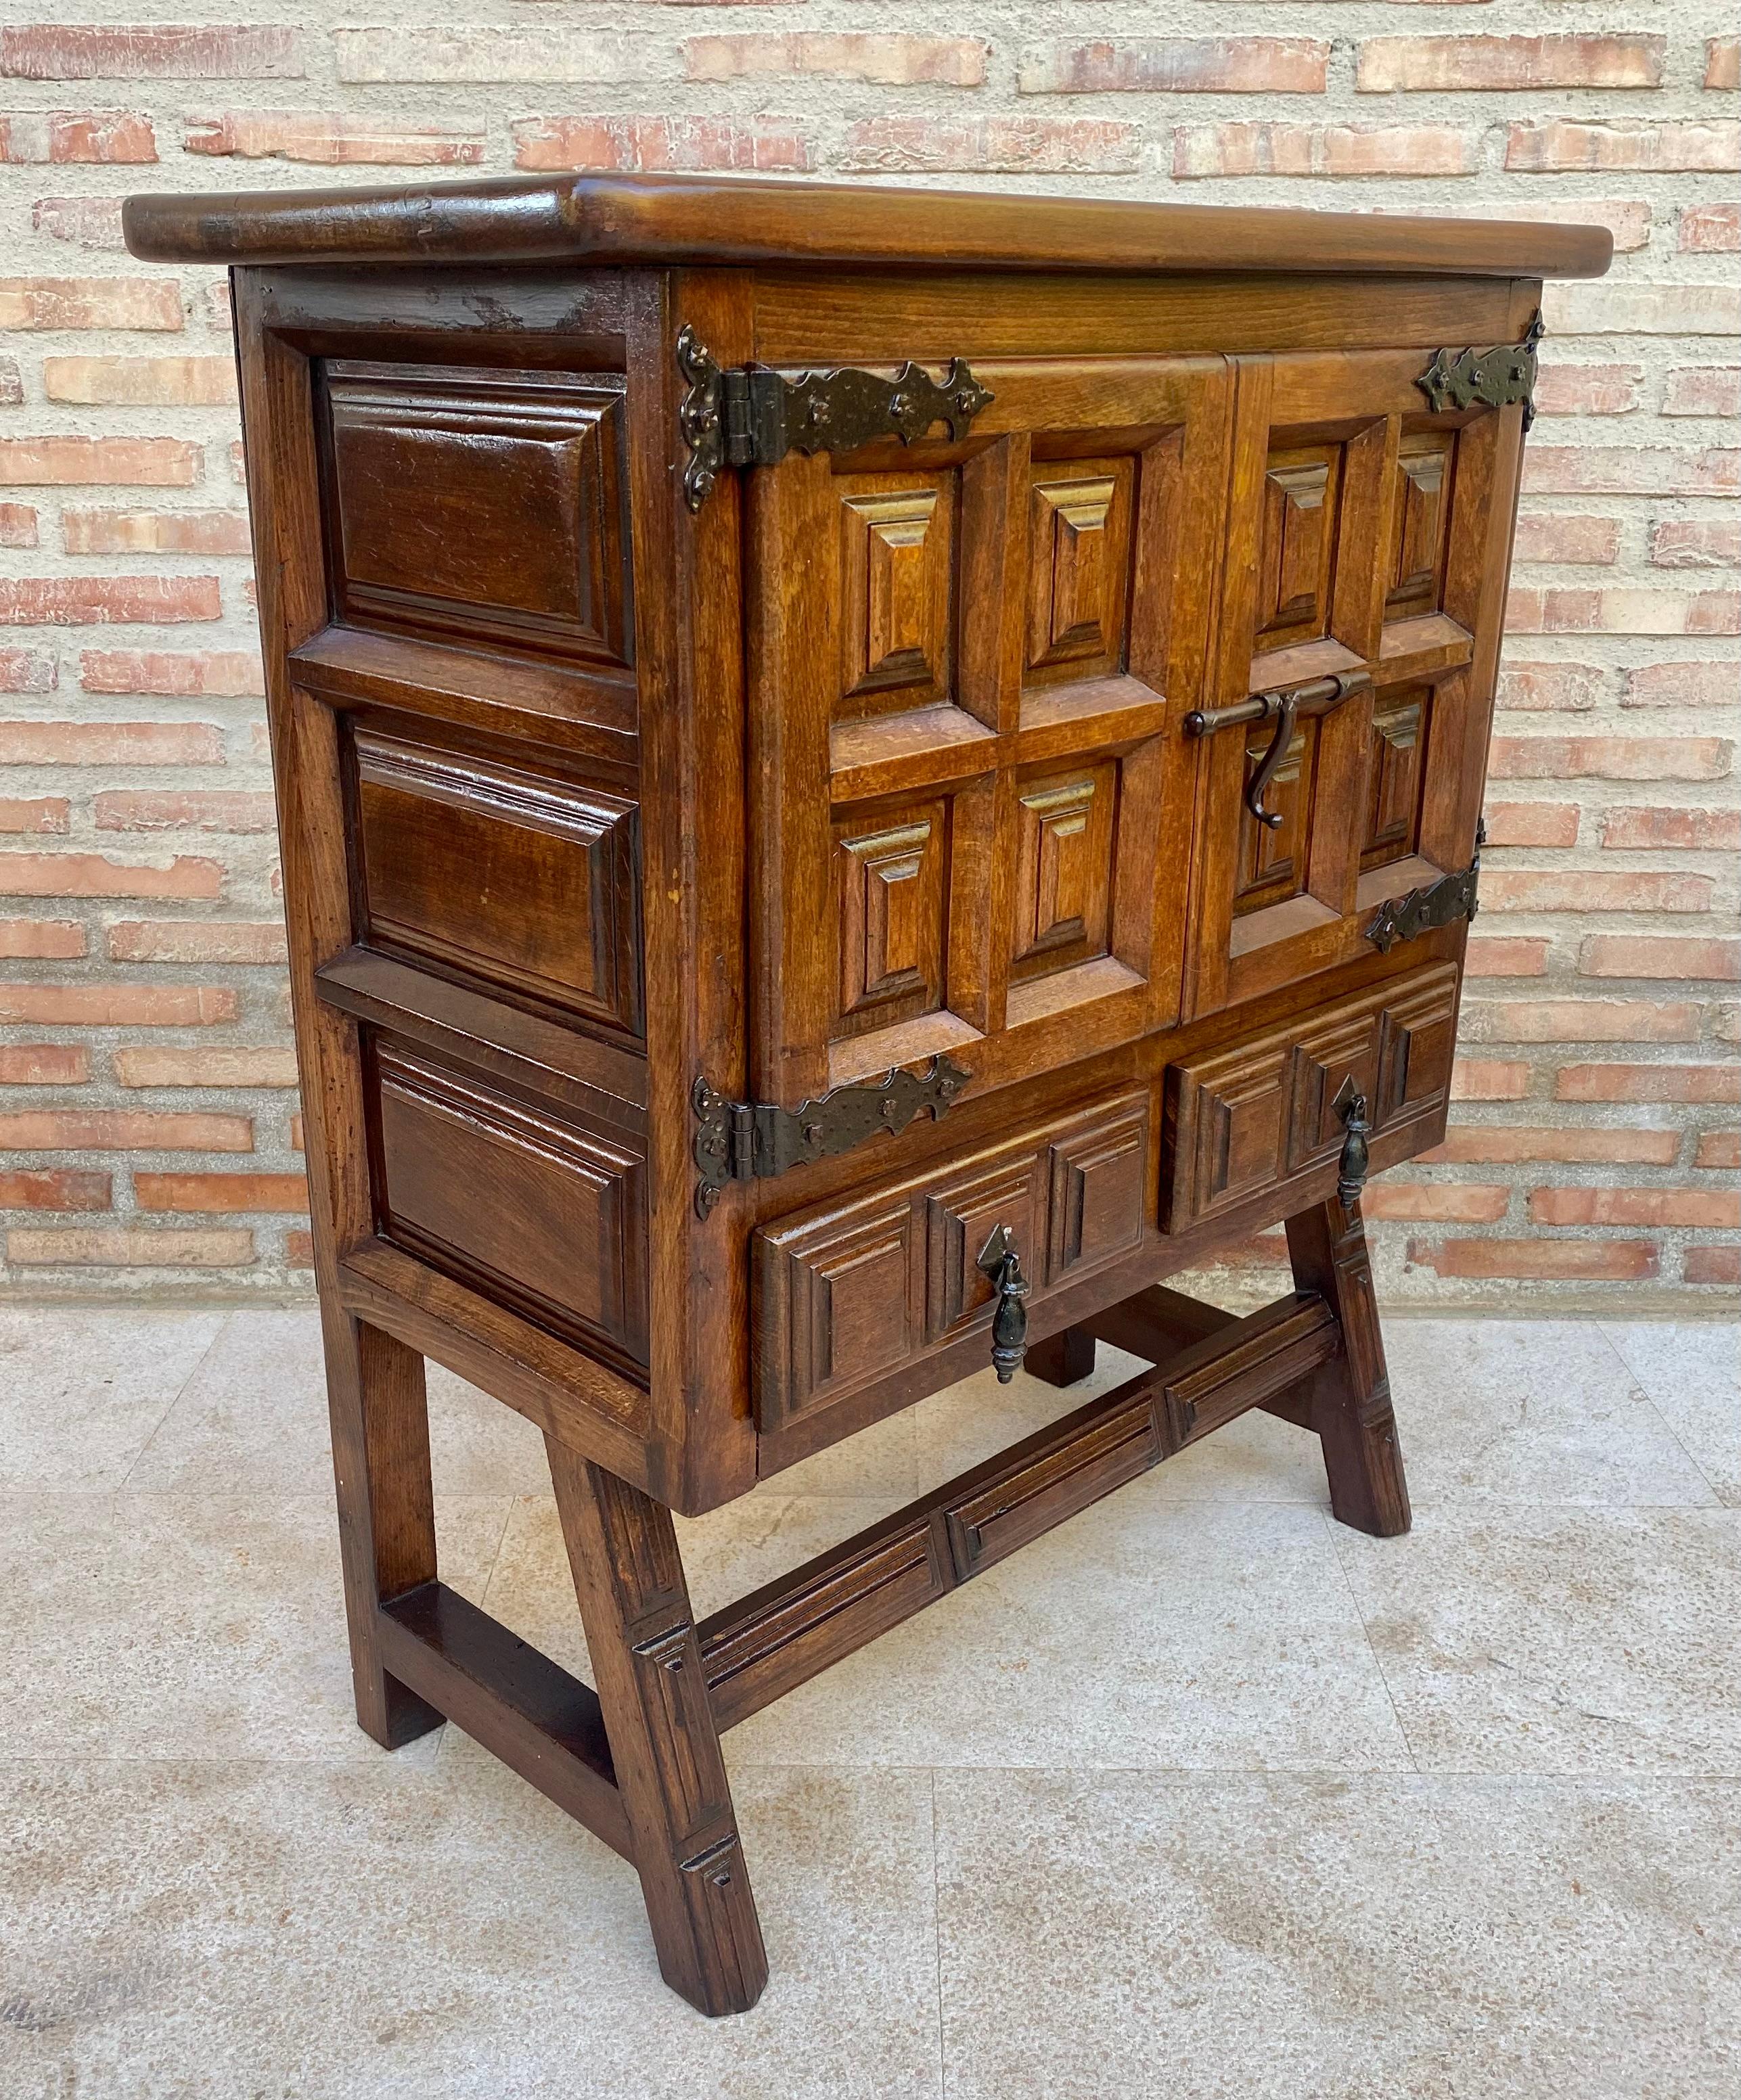 19th Catalan Spanish Baroque carved walnut Tuscan two drawers chest of drawers.

From the north of Spain, built in solid walnut, the rectangular top with a molded edge on a box that fits into two solid walnut paneled doors, two drawers in the lower